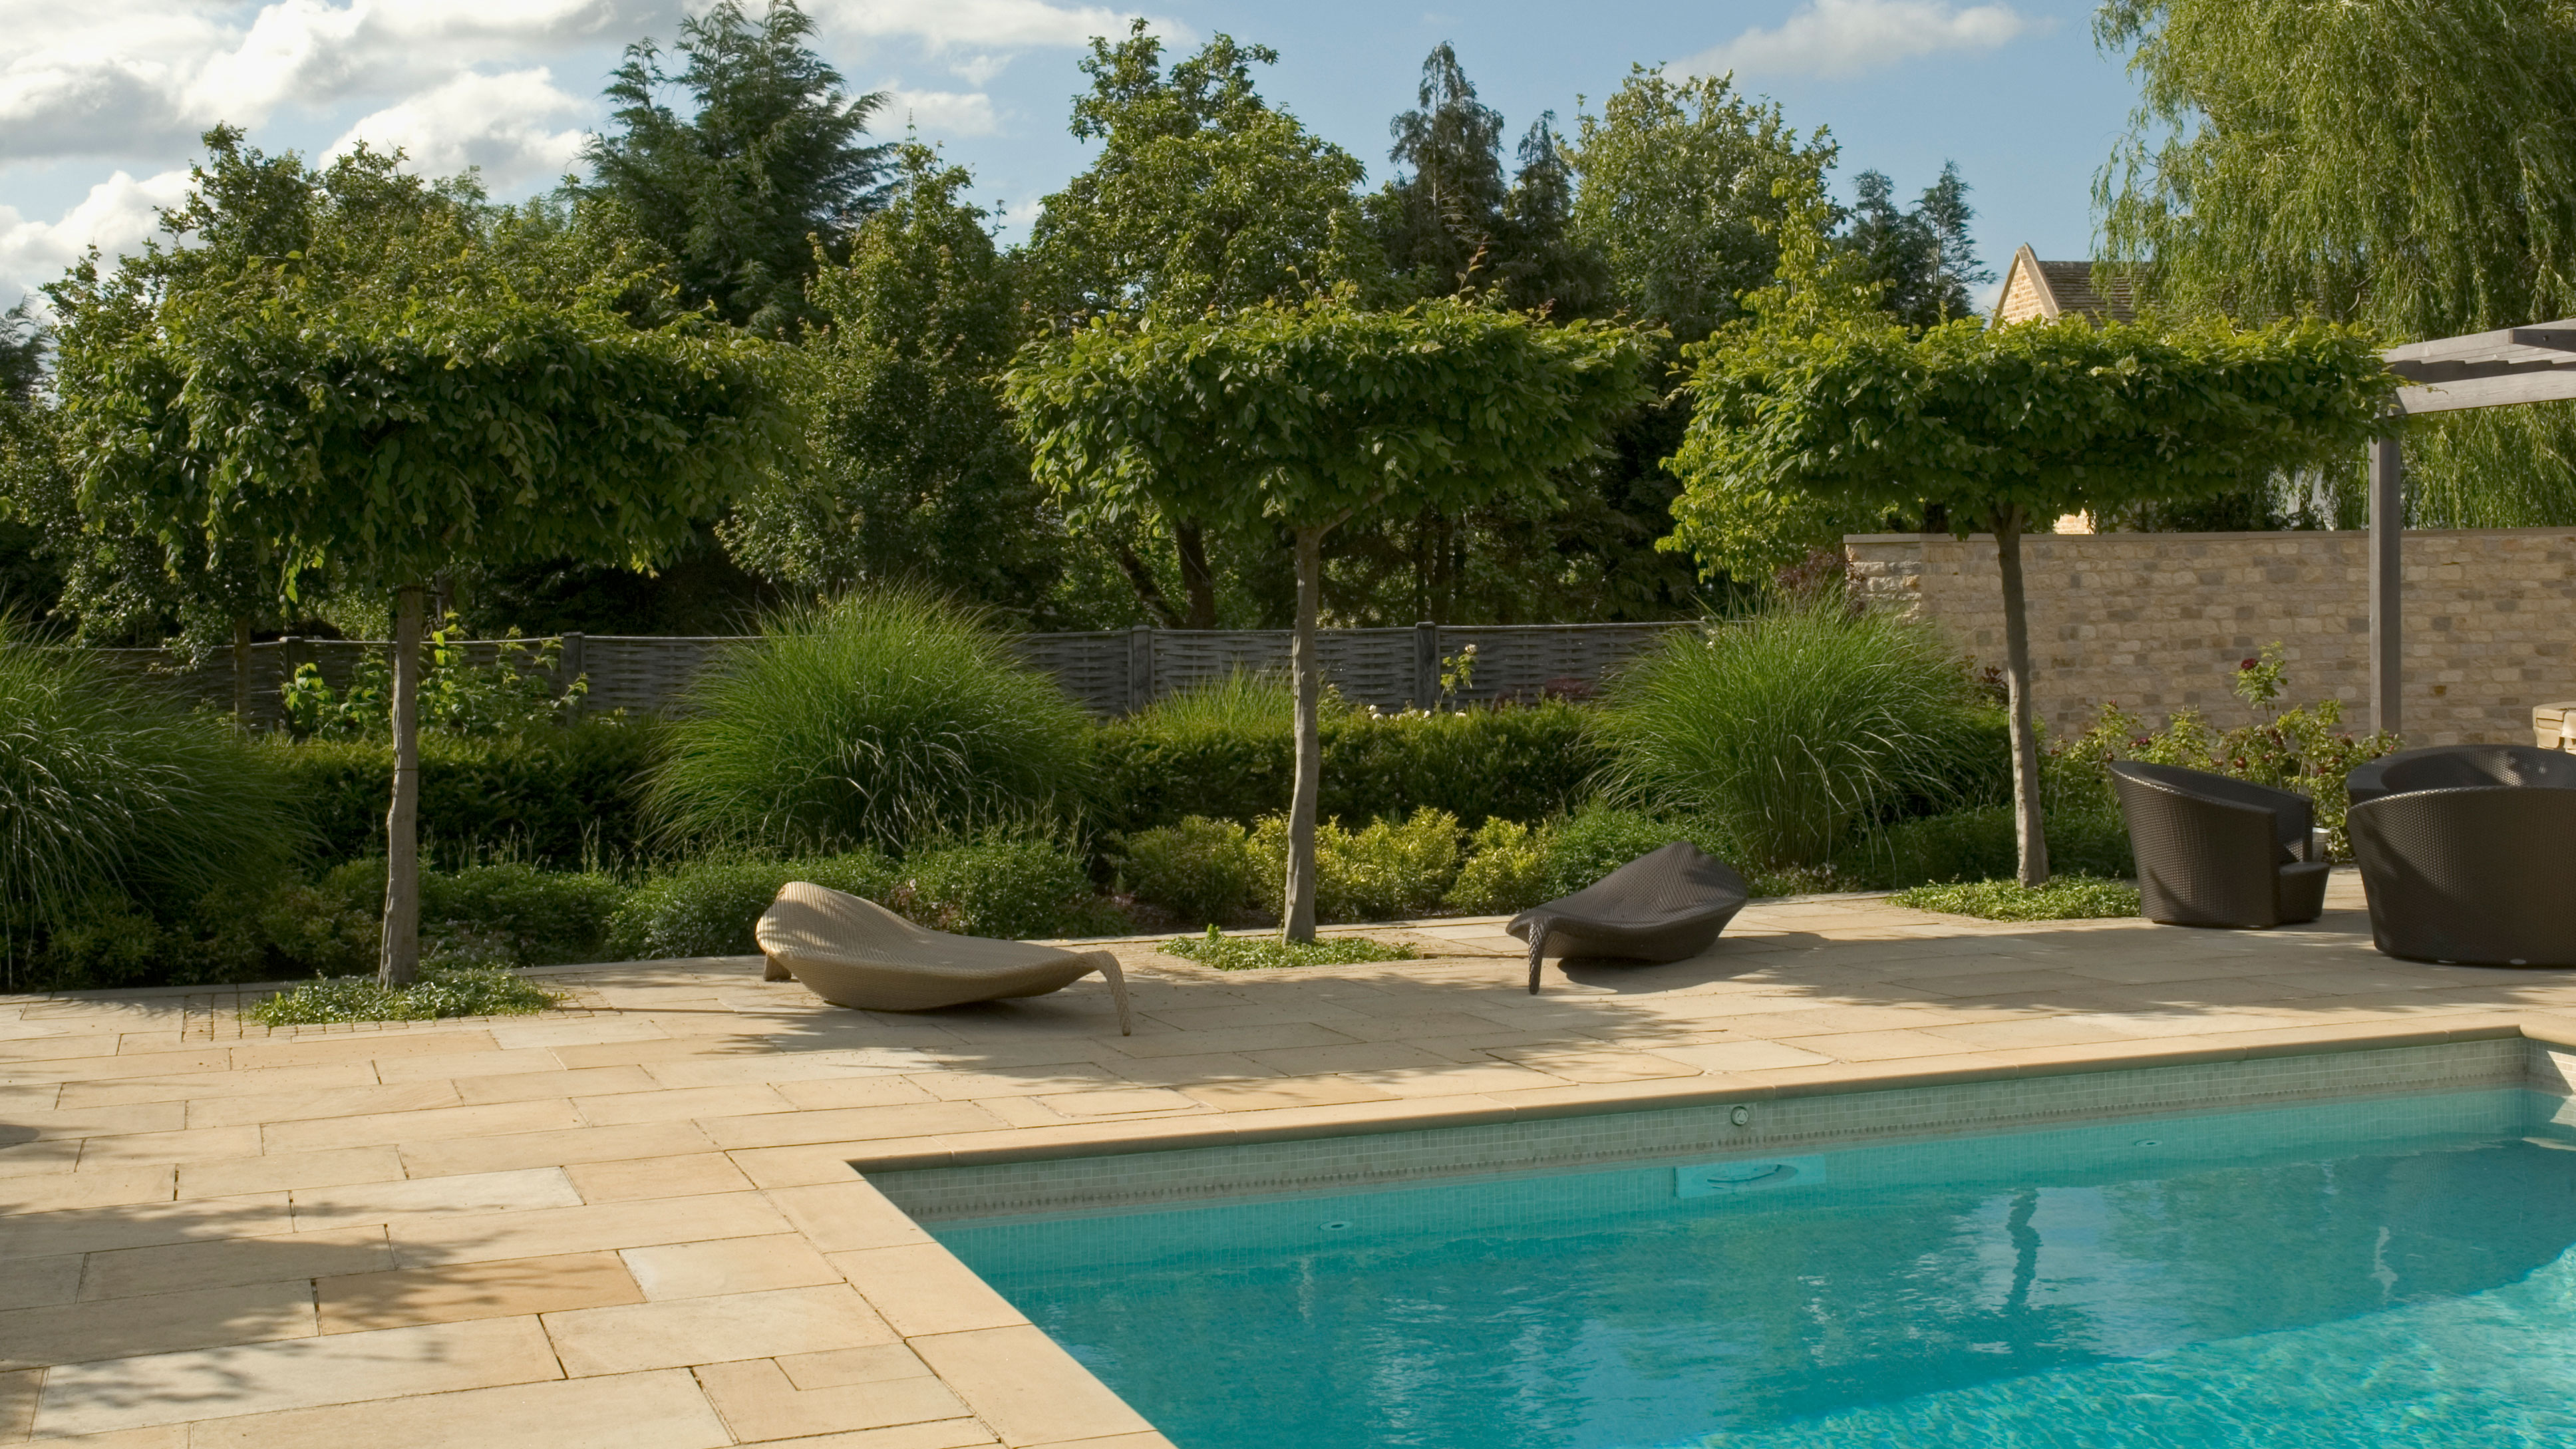 Pool Landscaping Ideas The Best, Best Landscaping Ideas Around Pool